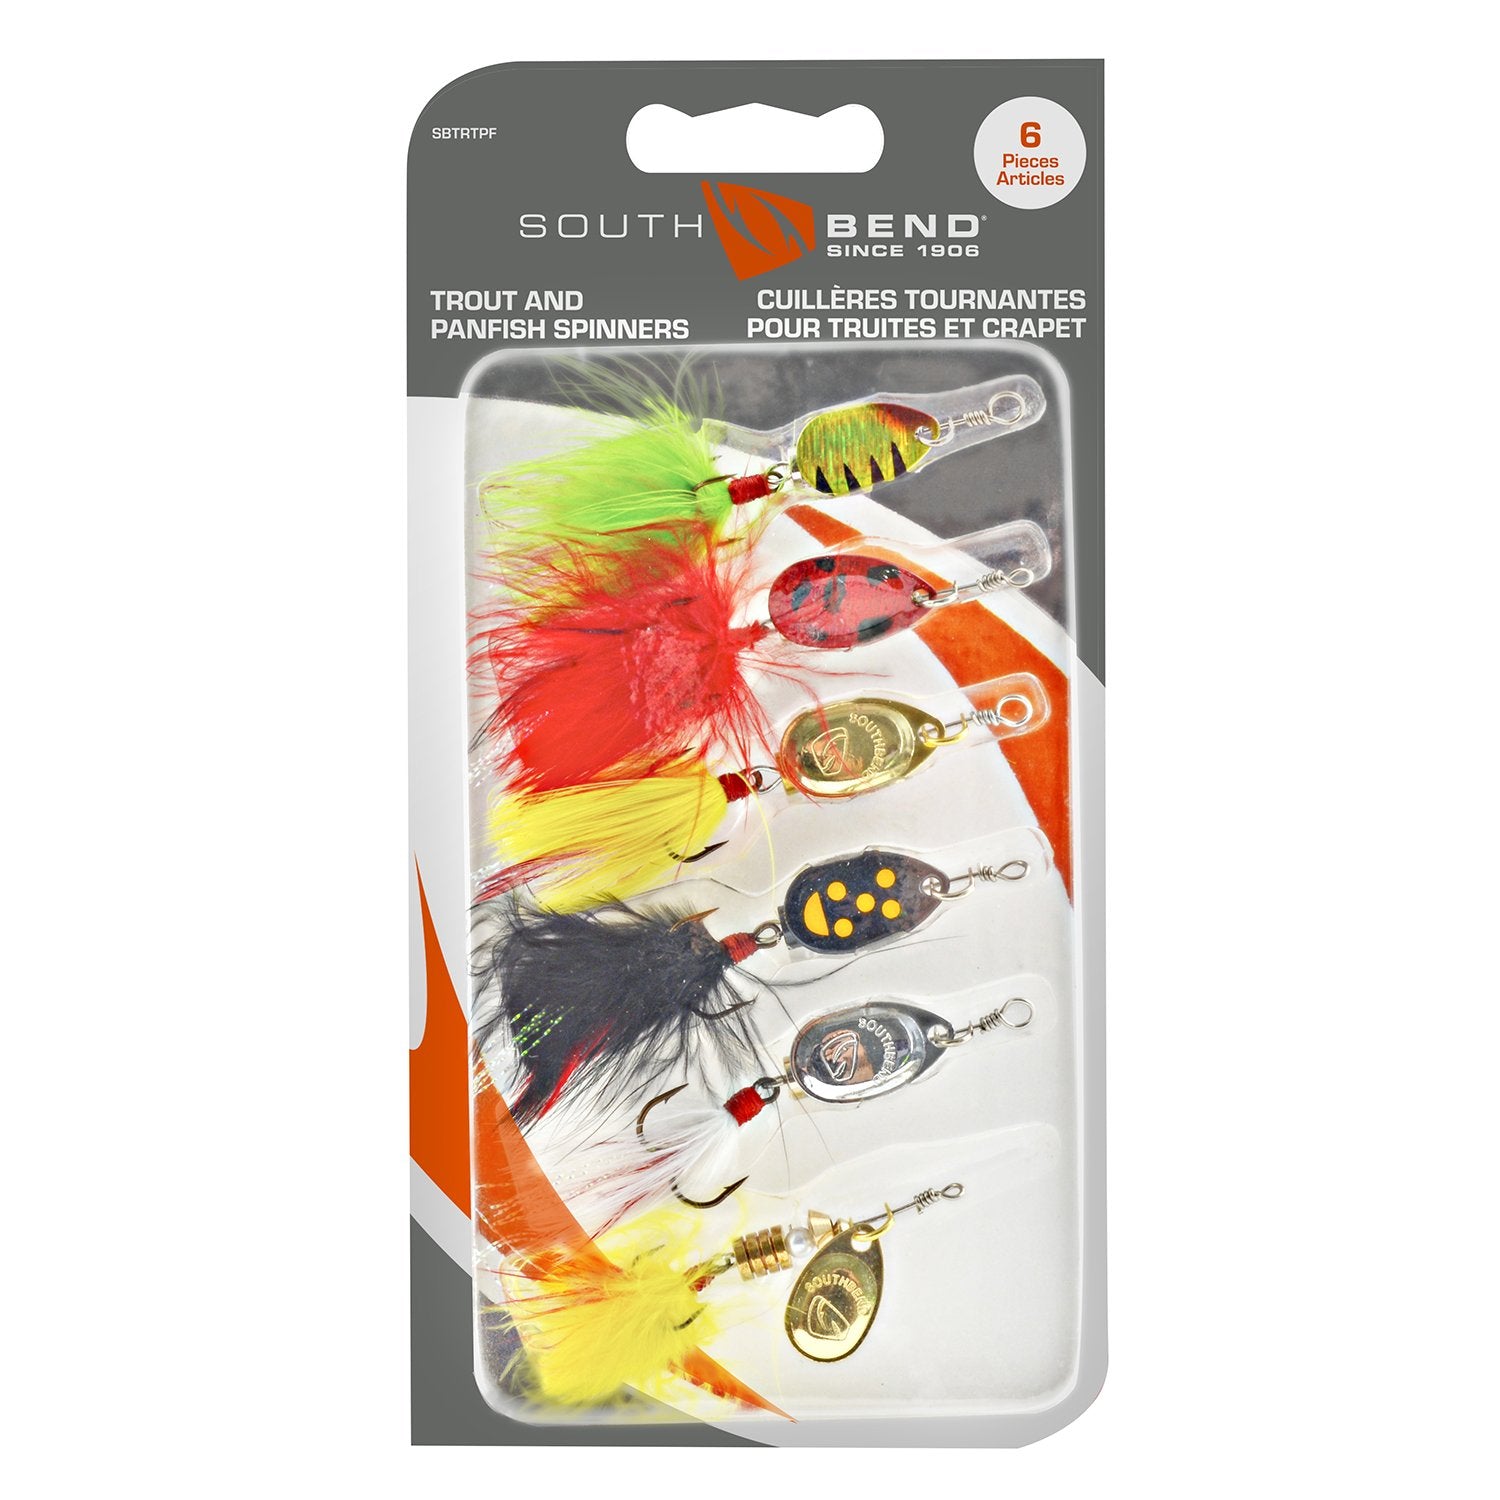 Steelhead and Spinners (Stingeye), We're boatless today and casting  spinners from the shoreline of the Niagara Whirlpool targeting steelhead.  We're using our favourite spinners, the